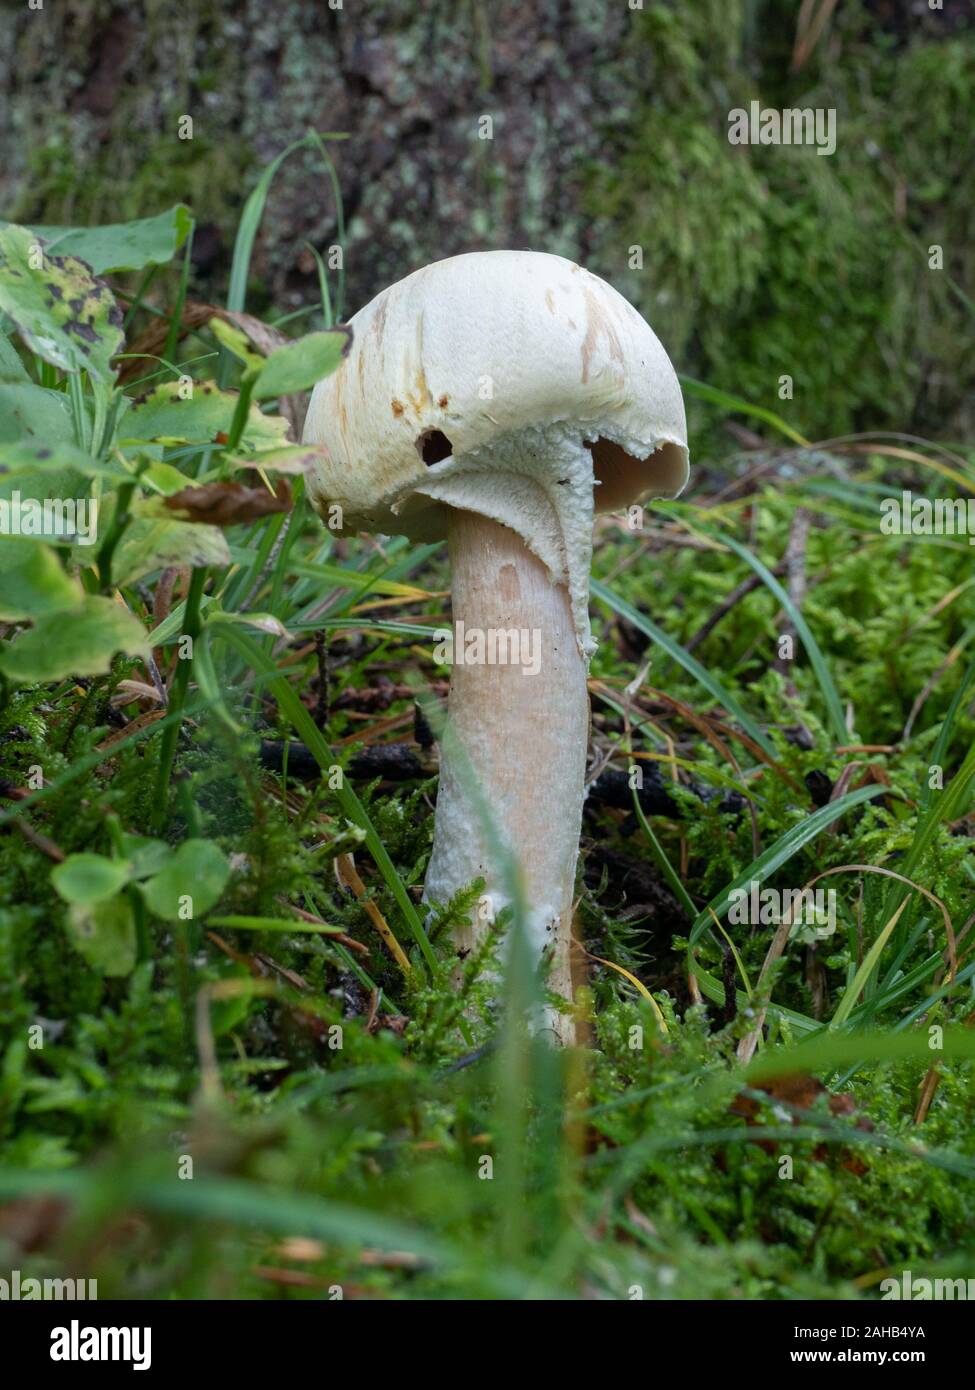 Agaricus silvicola, also known as the wood mushroom, growing in Görvälns naturreservat, Sweden. Stock Photo